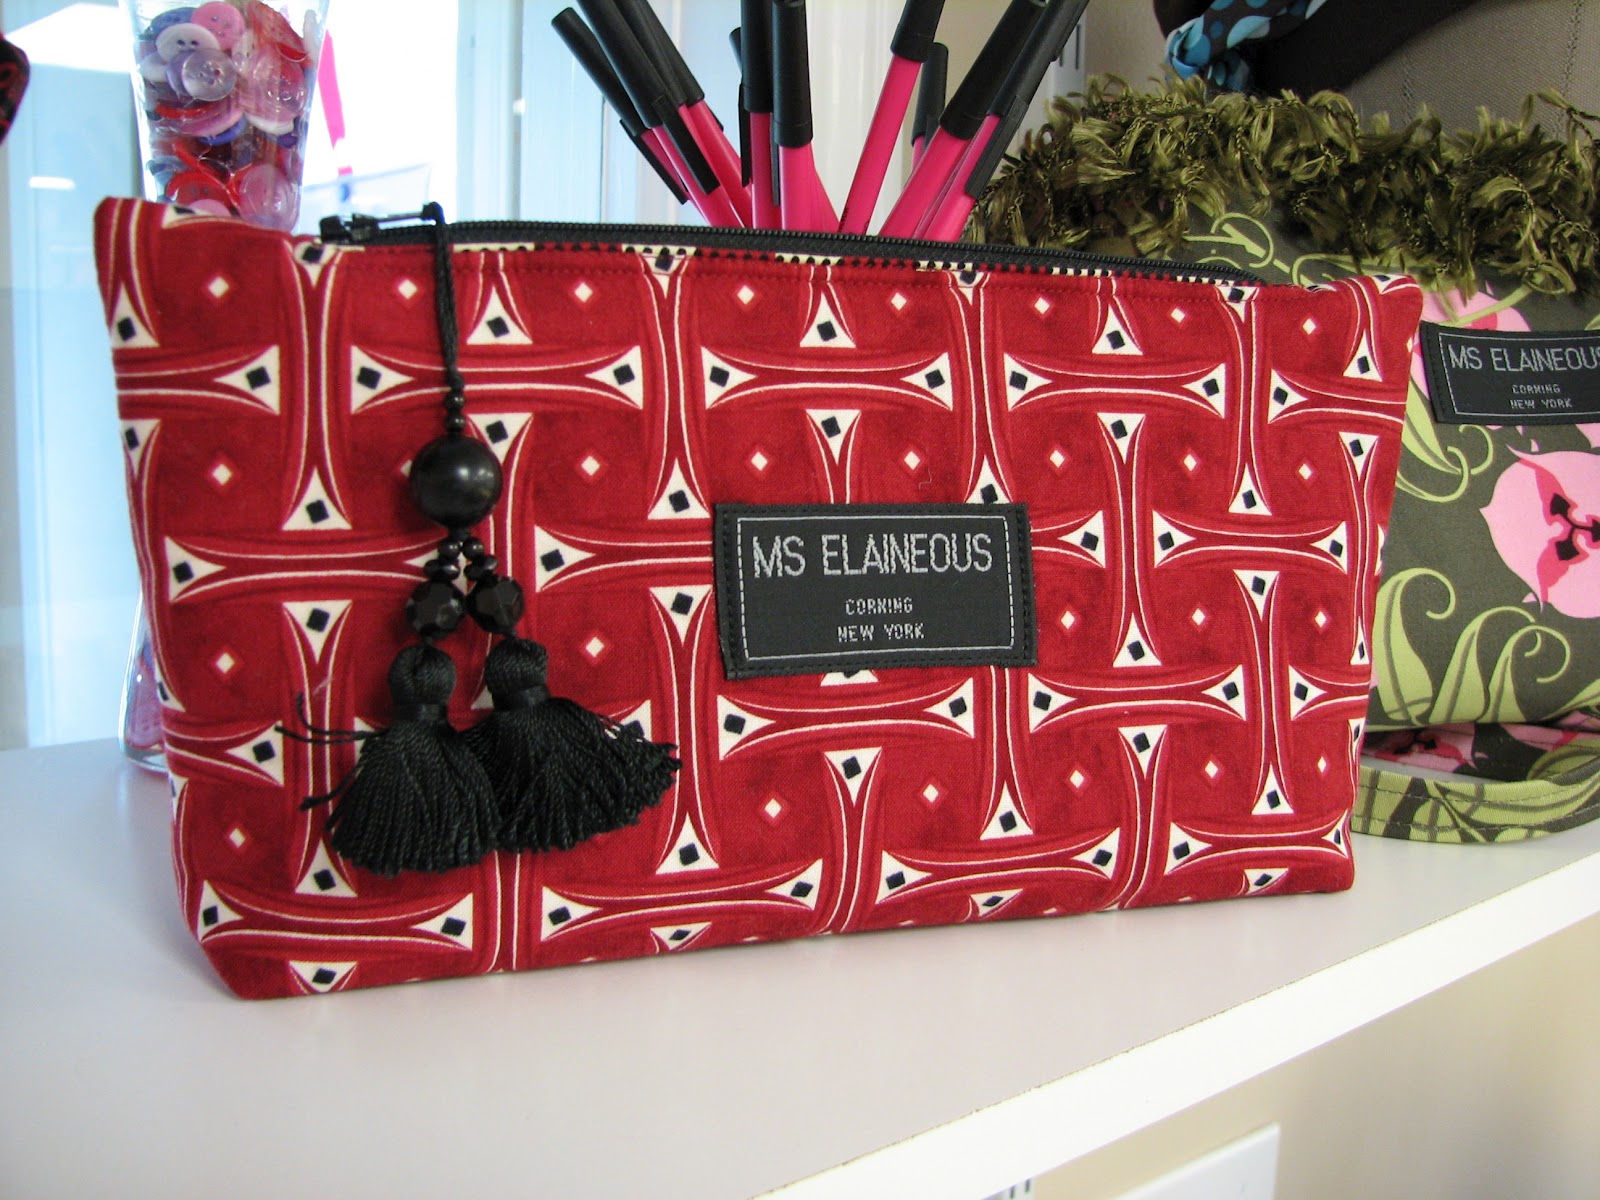 Ms. Elaineous Teaches Sewing: Zippers 101: Cosmetic Bags!